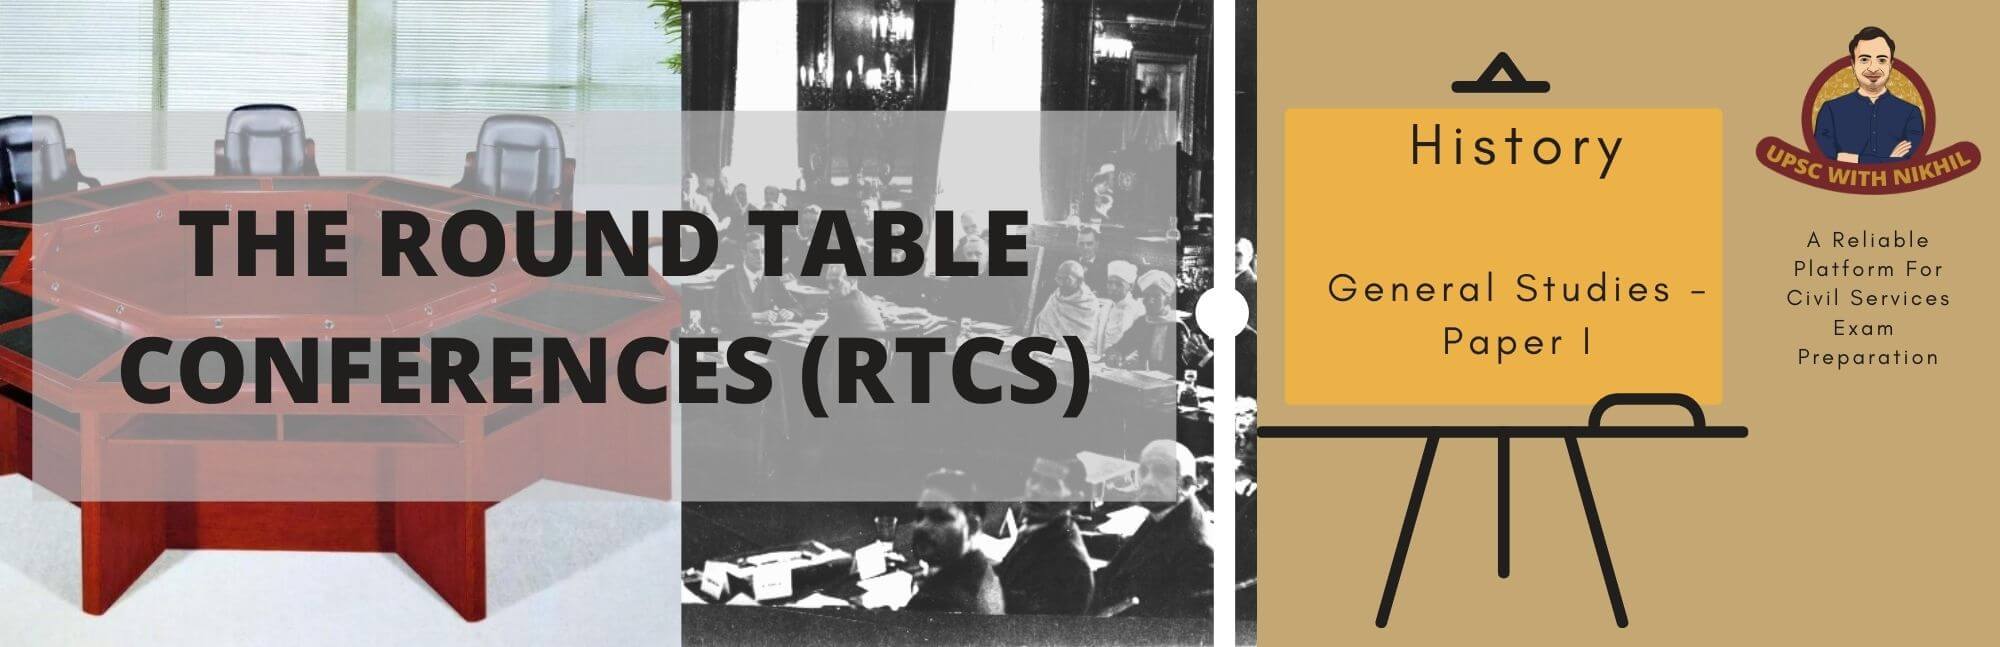 The Round Table Conferences Rtcs, Where Were All The Three Round Table Conferences Held